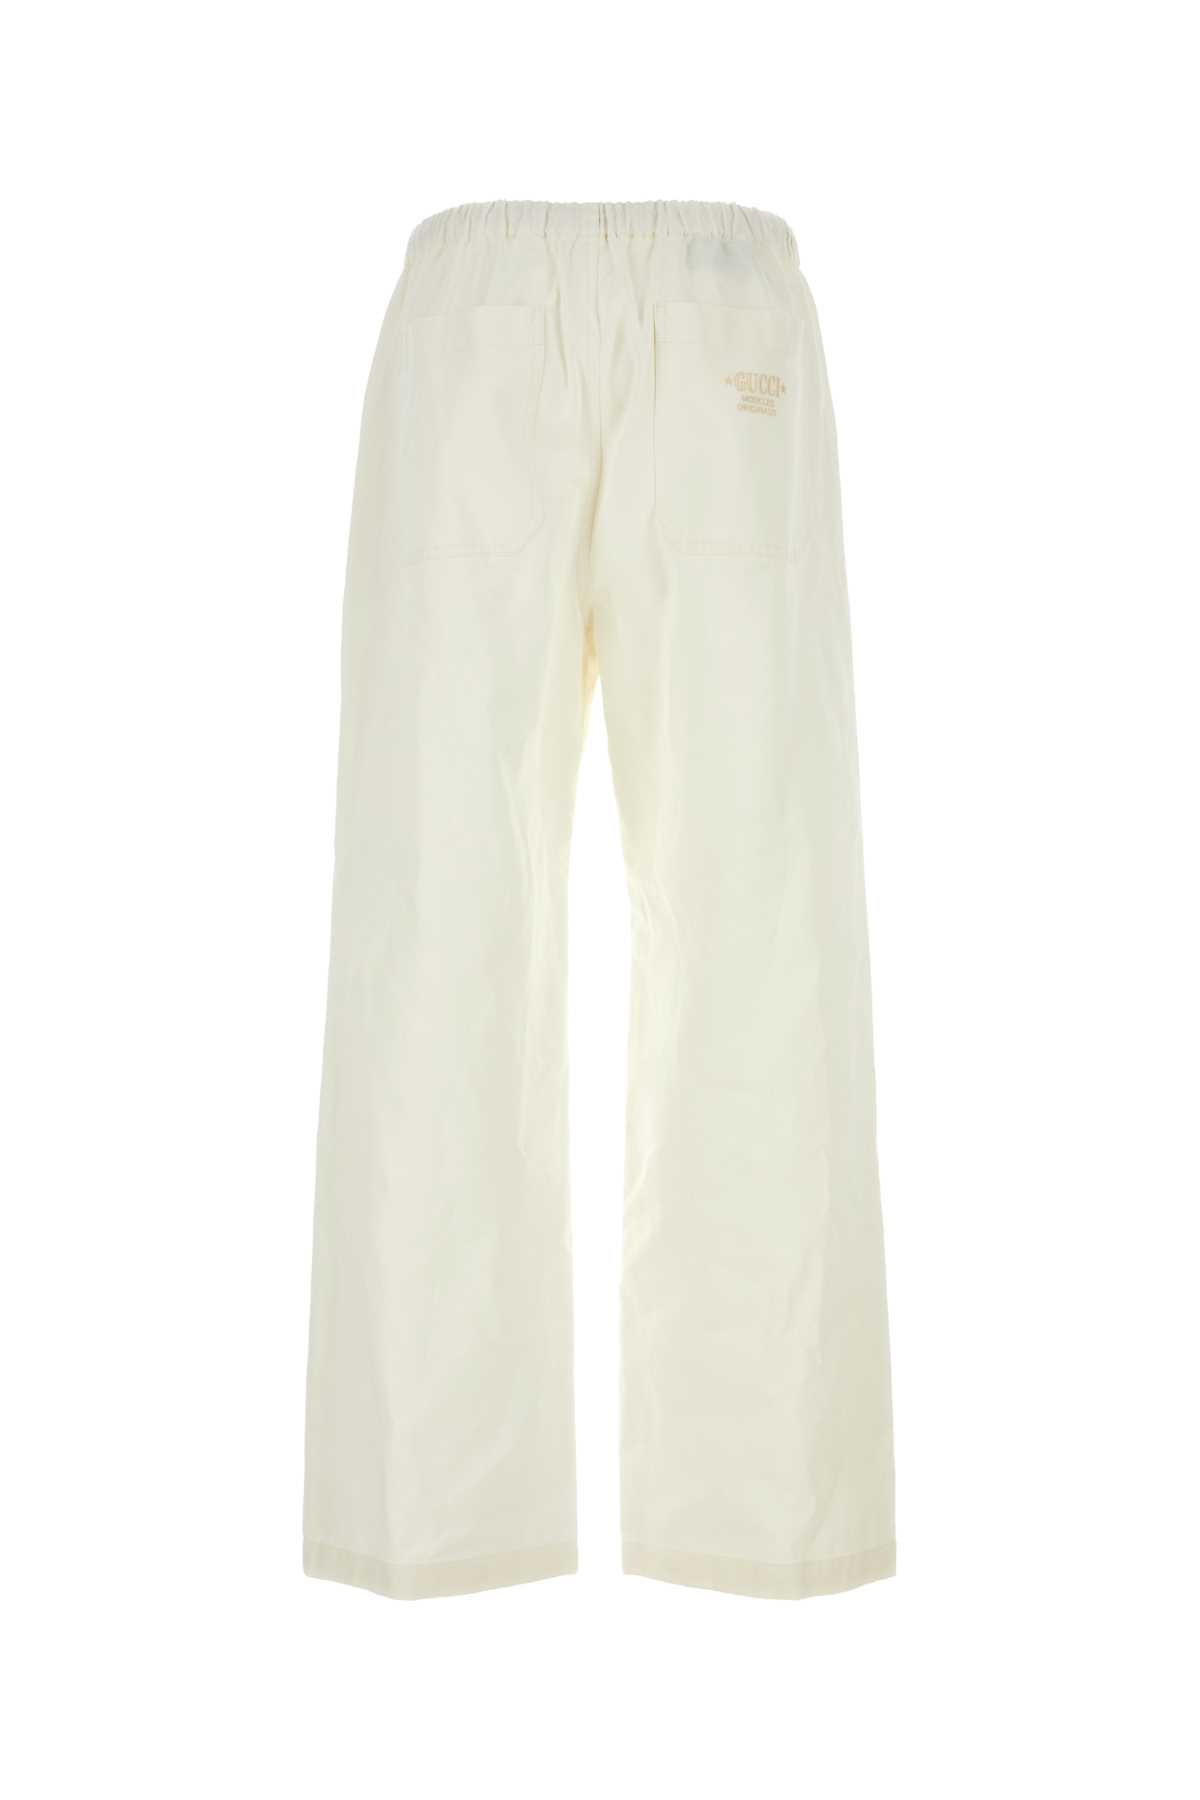 Gucci Ivory Drill Pant In Milk